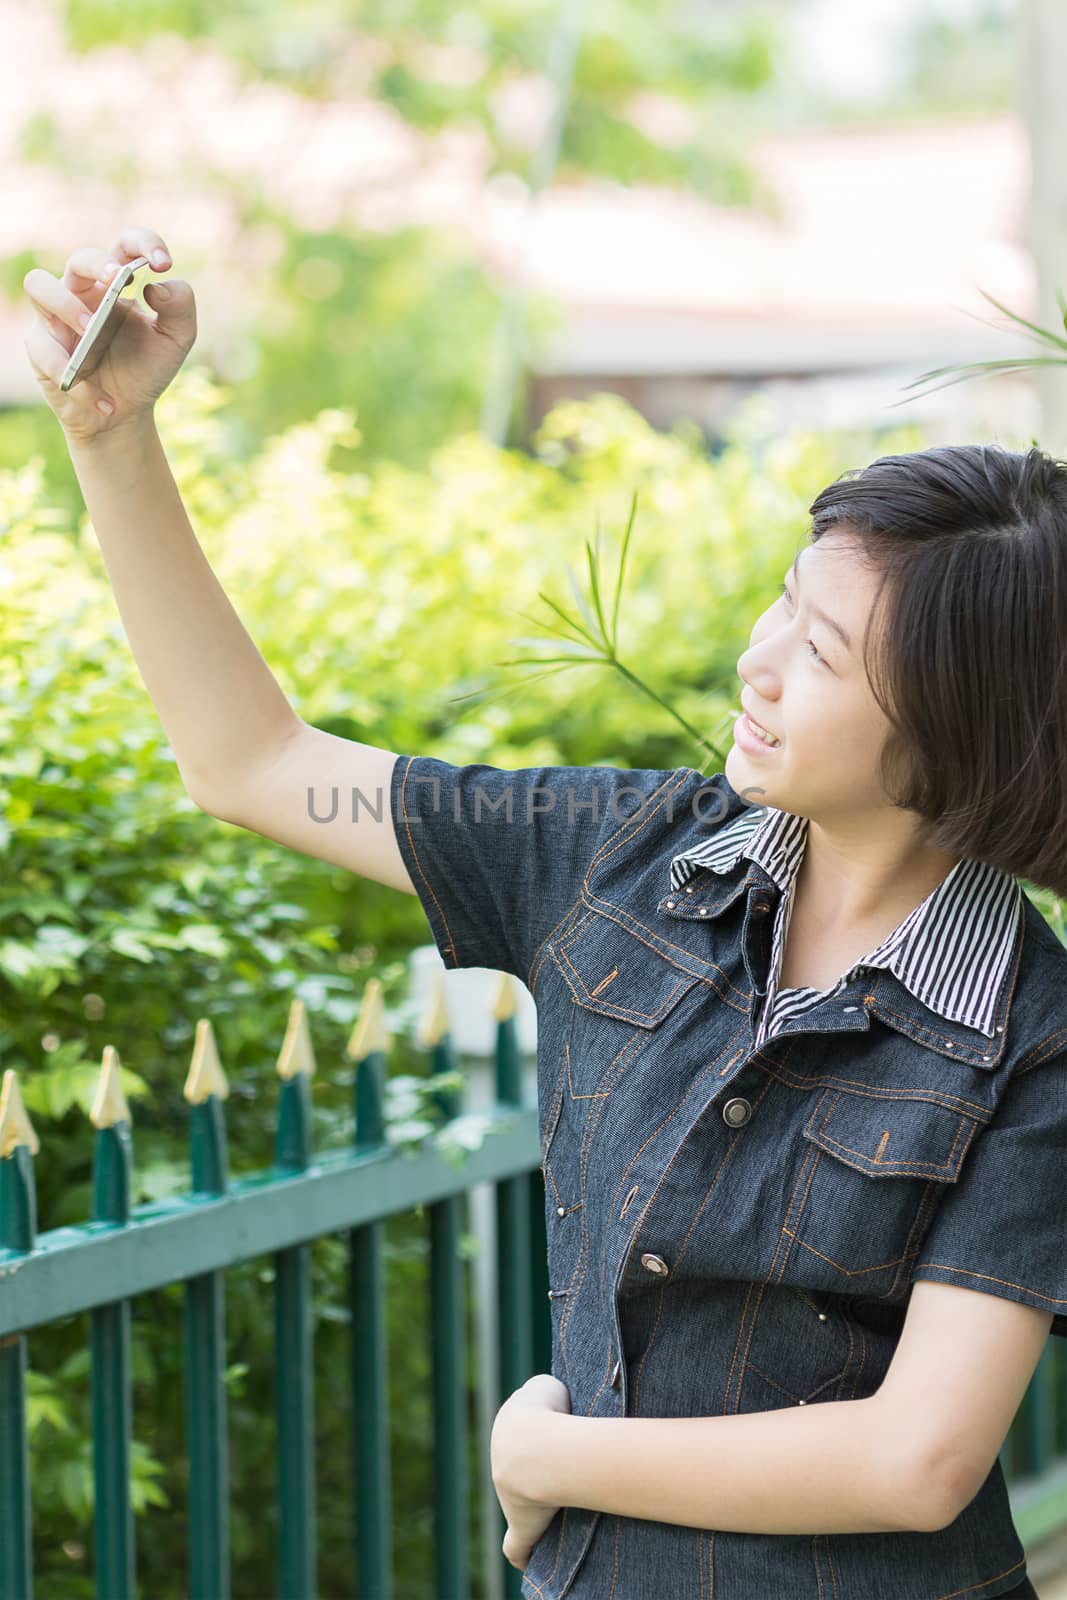 Asian girl with short hair using mobile phone to take selfie outdoor in garden